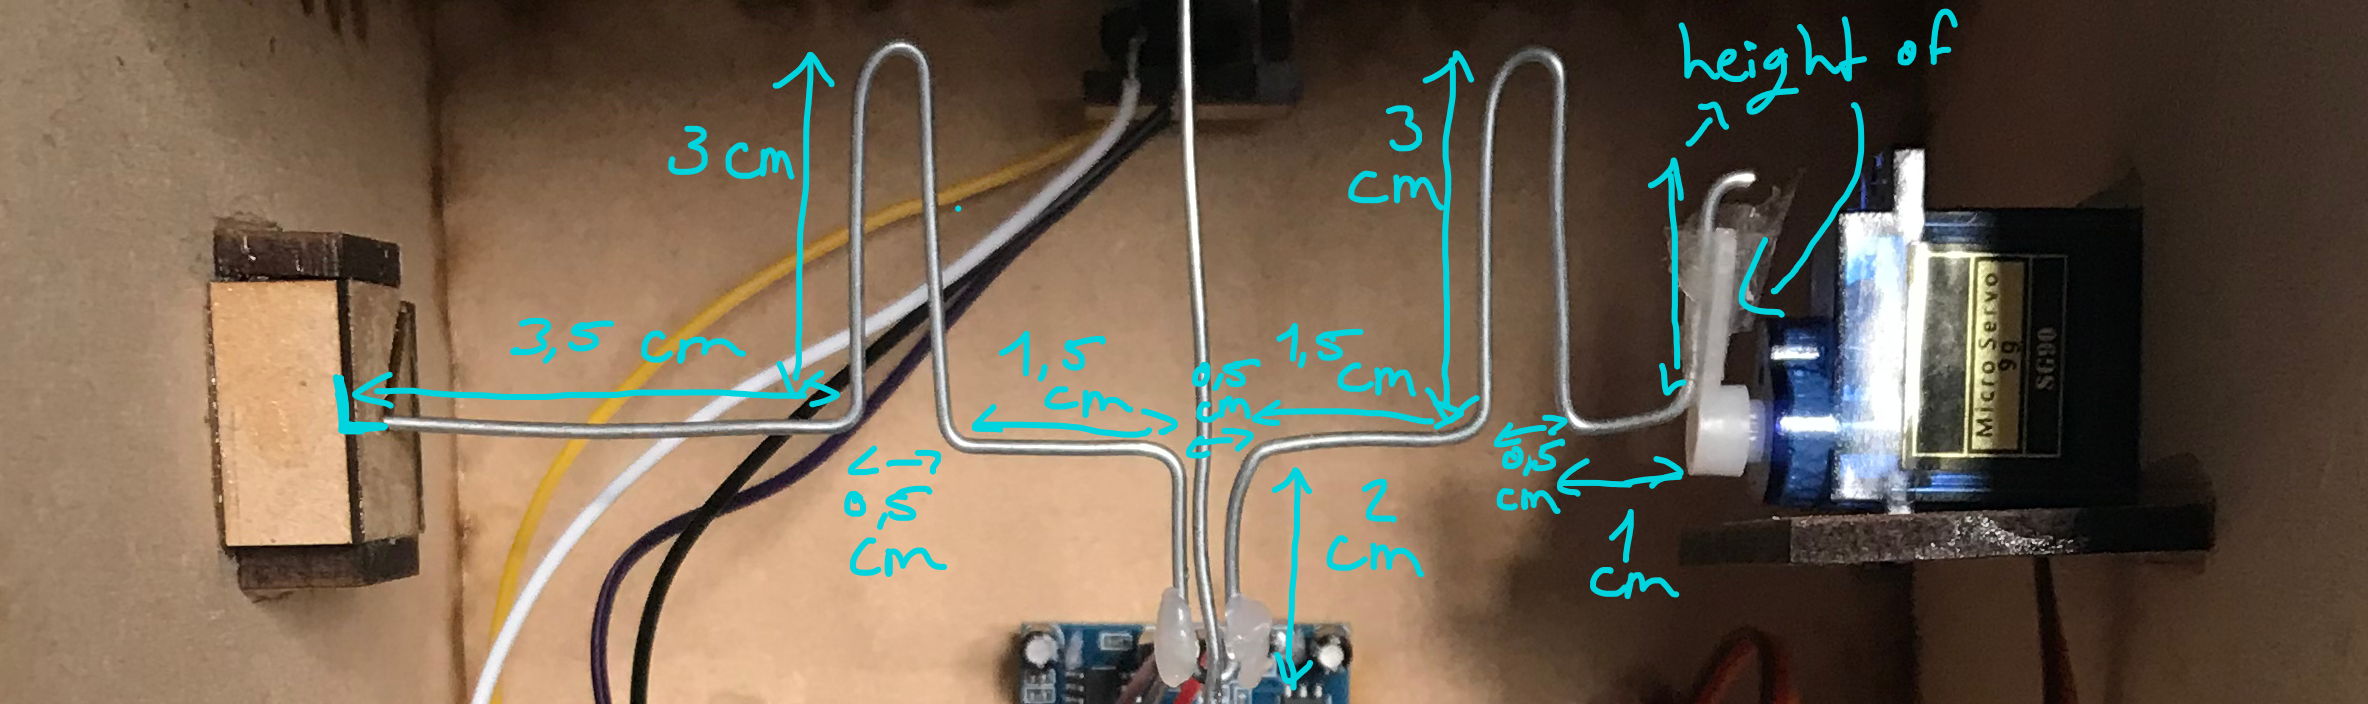 wiring info.png